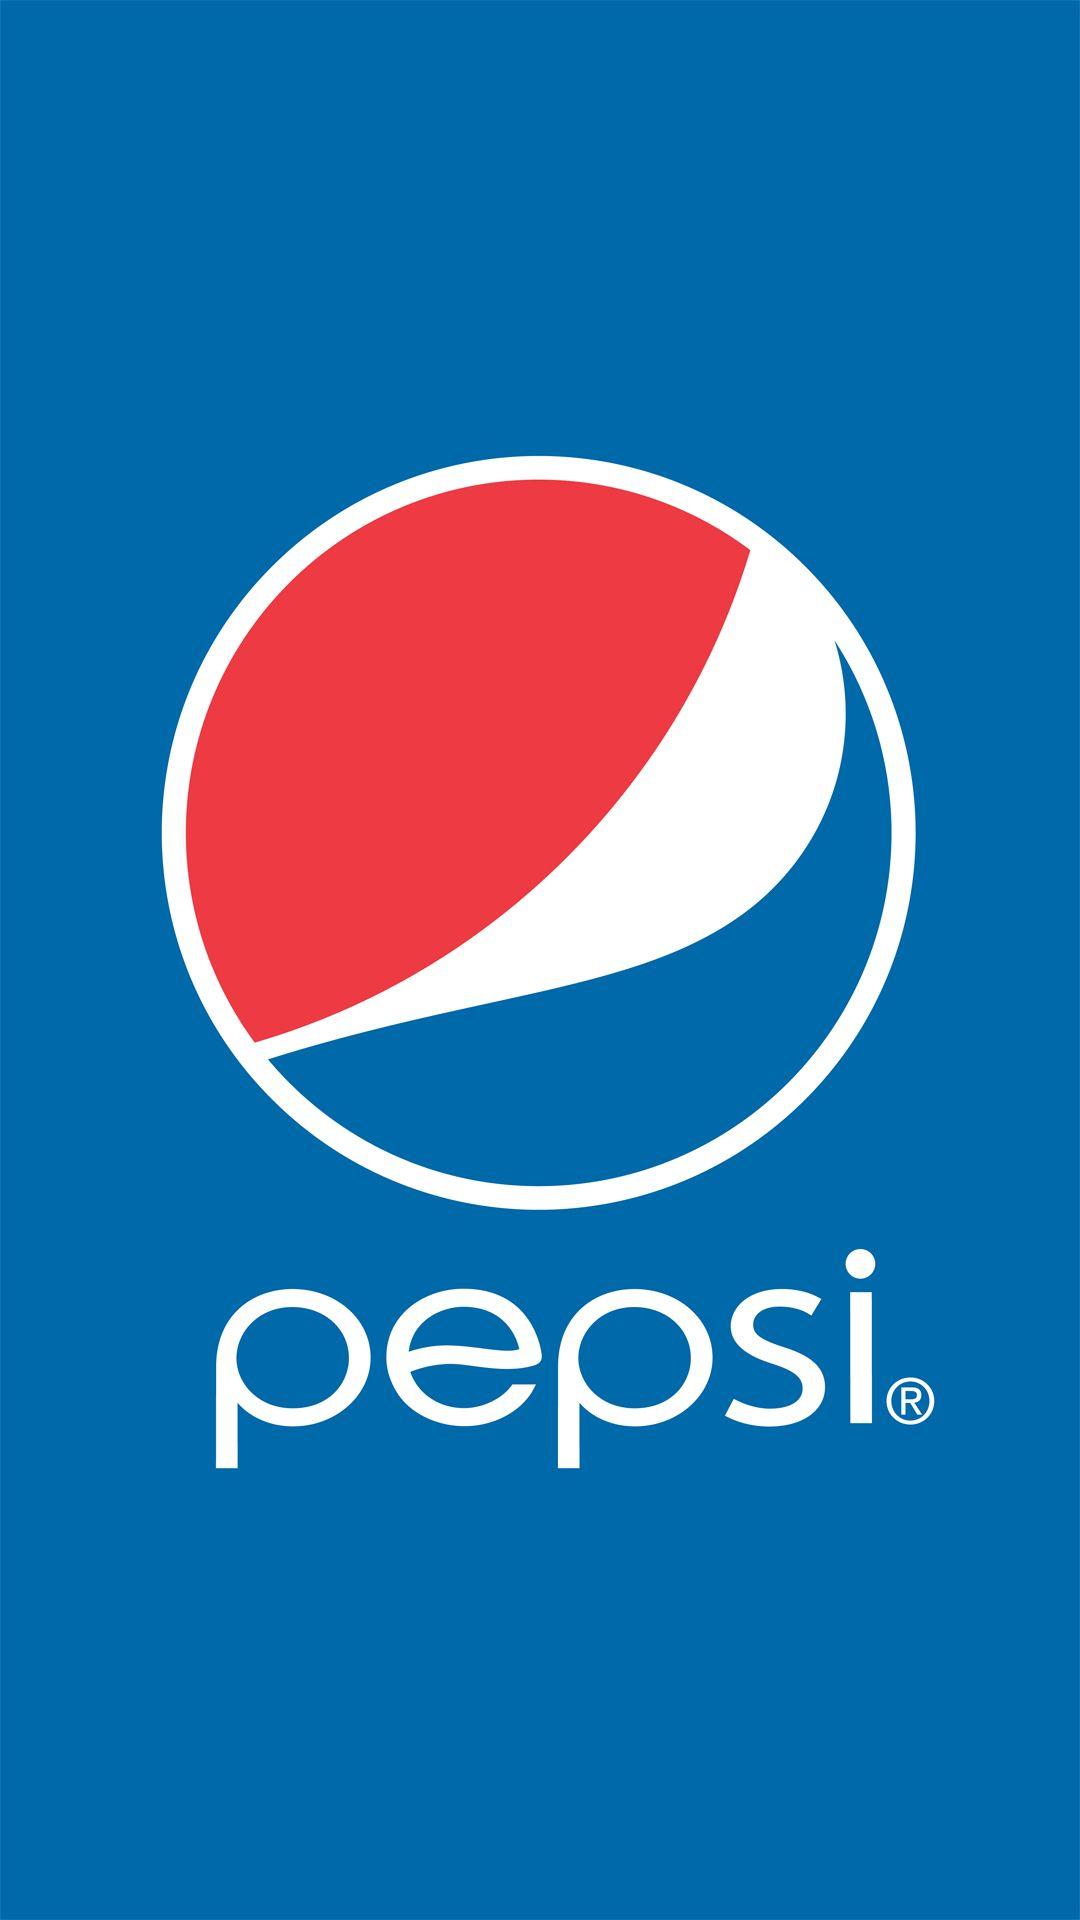 Pepci Logo - Pepsi logo htc one wallpaper, free and easy to download